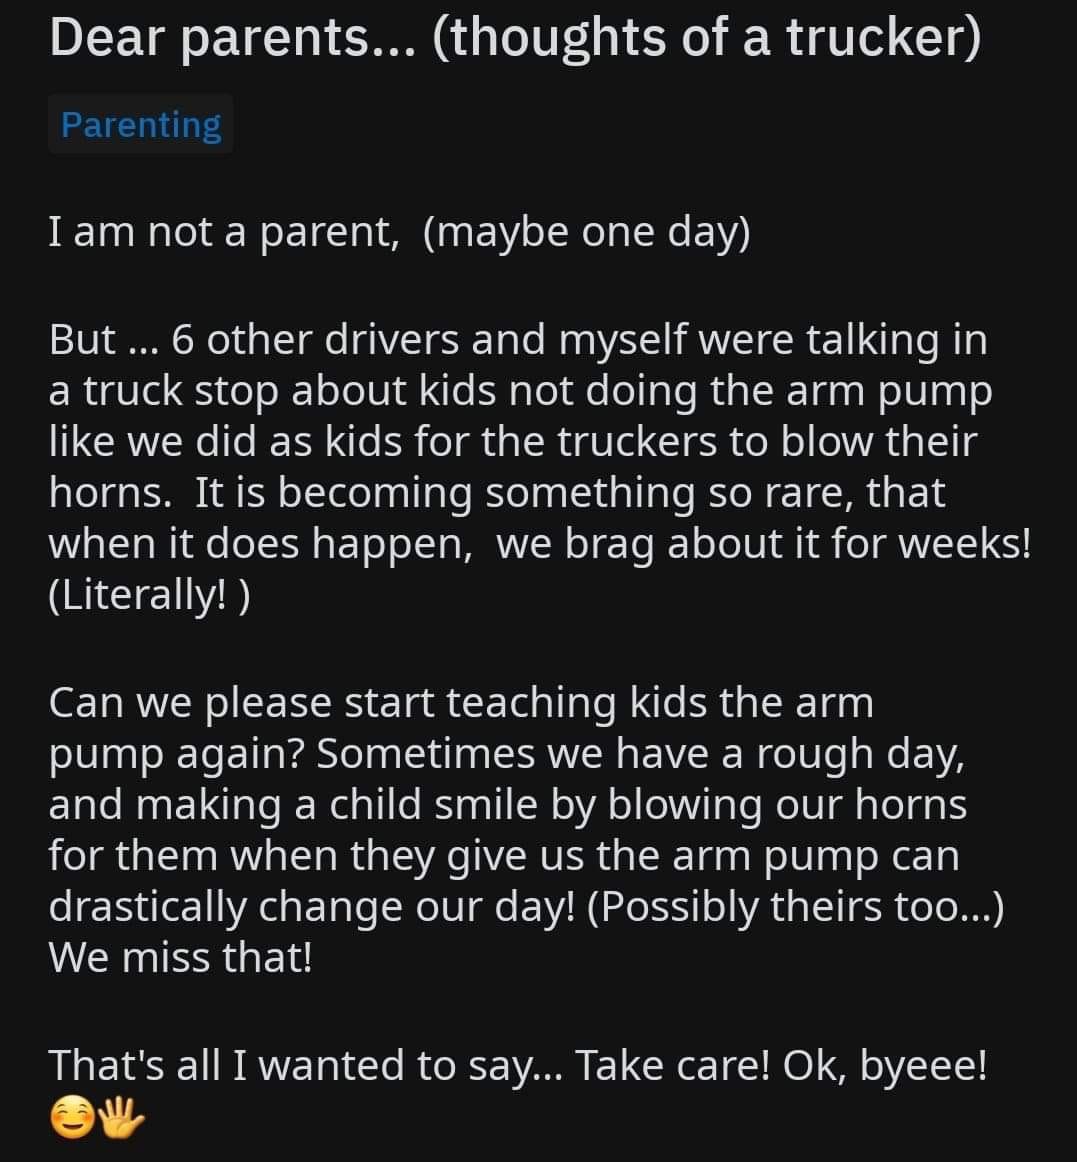 long day at work - Dear parents... thoughts of a trucker Parenting I am not a parent, maybe one day But ... 6 other drivers and myself were talking in a truck stop about kids not doing the arm pump we did as kids for the truckers to blow their horns. It i